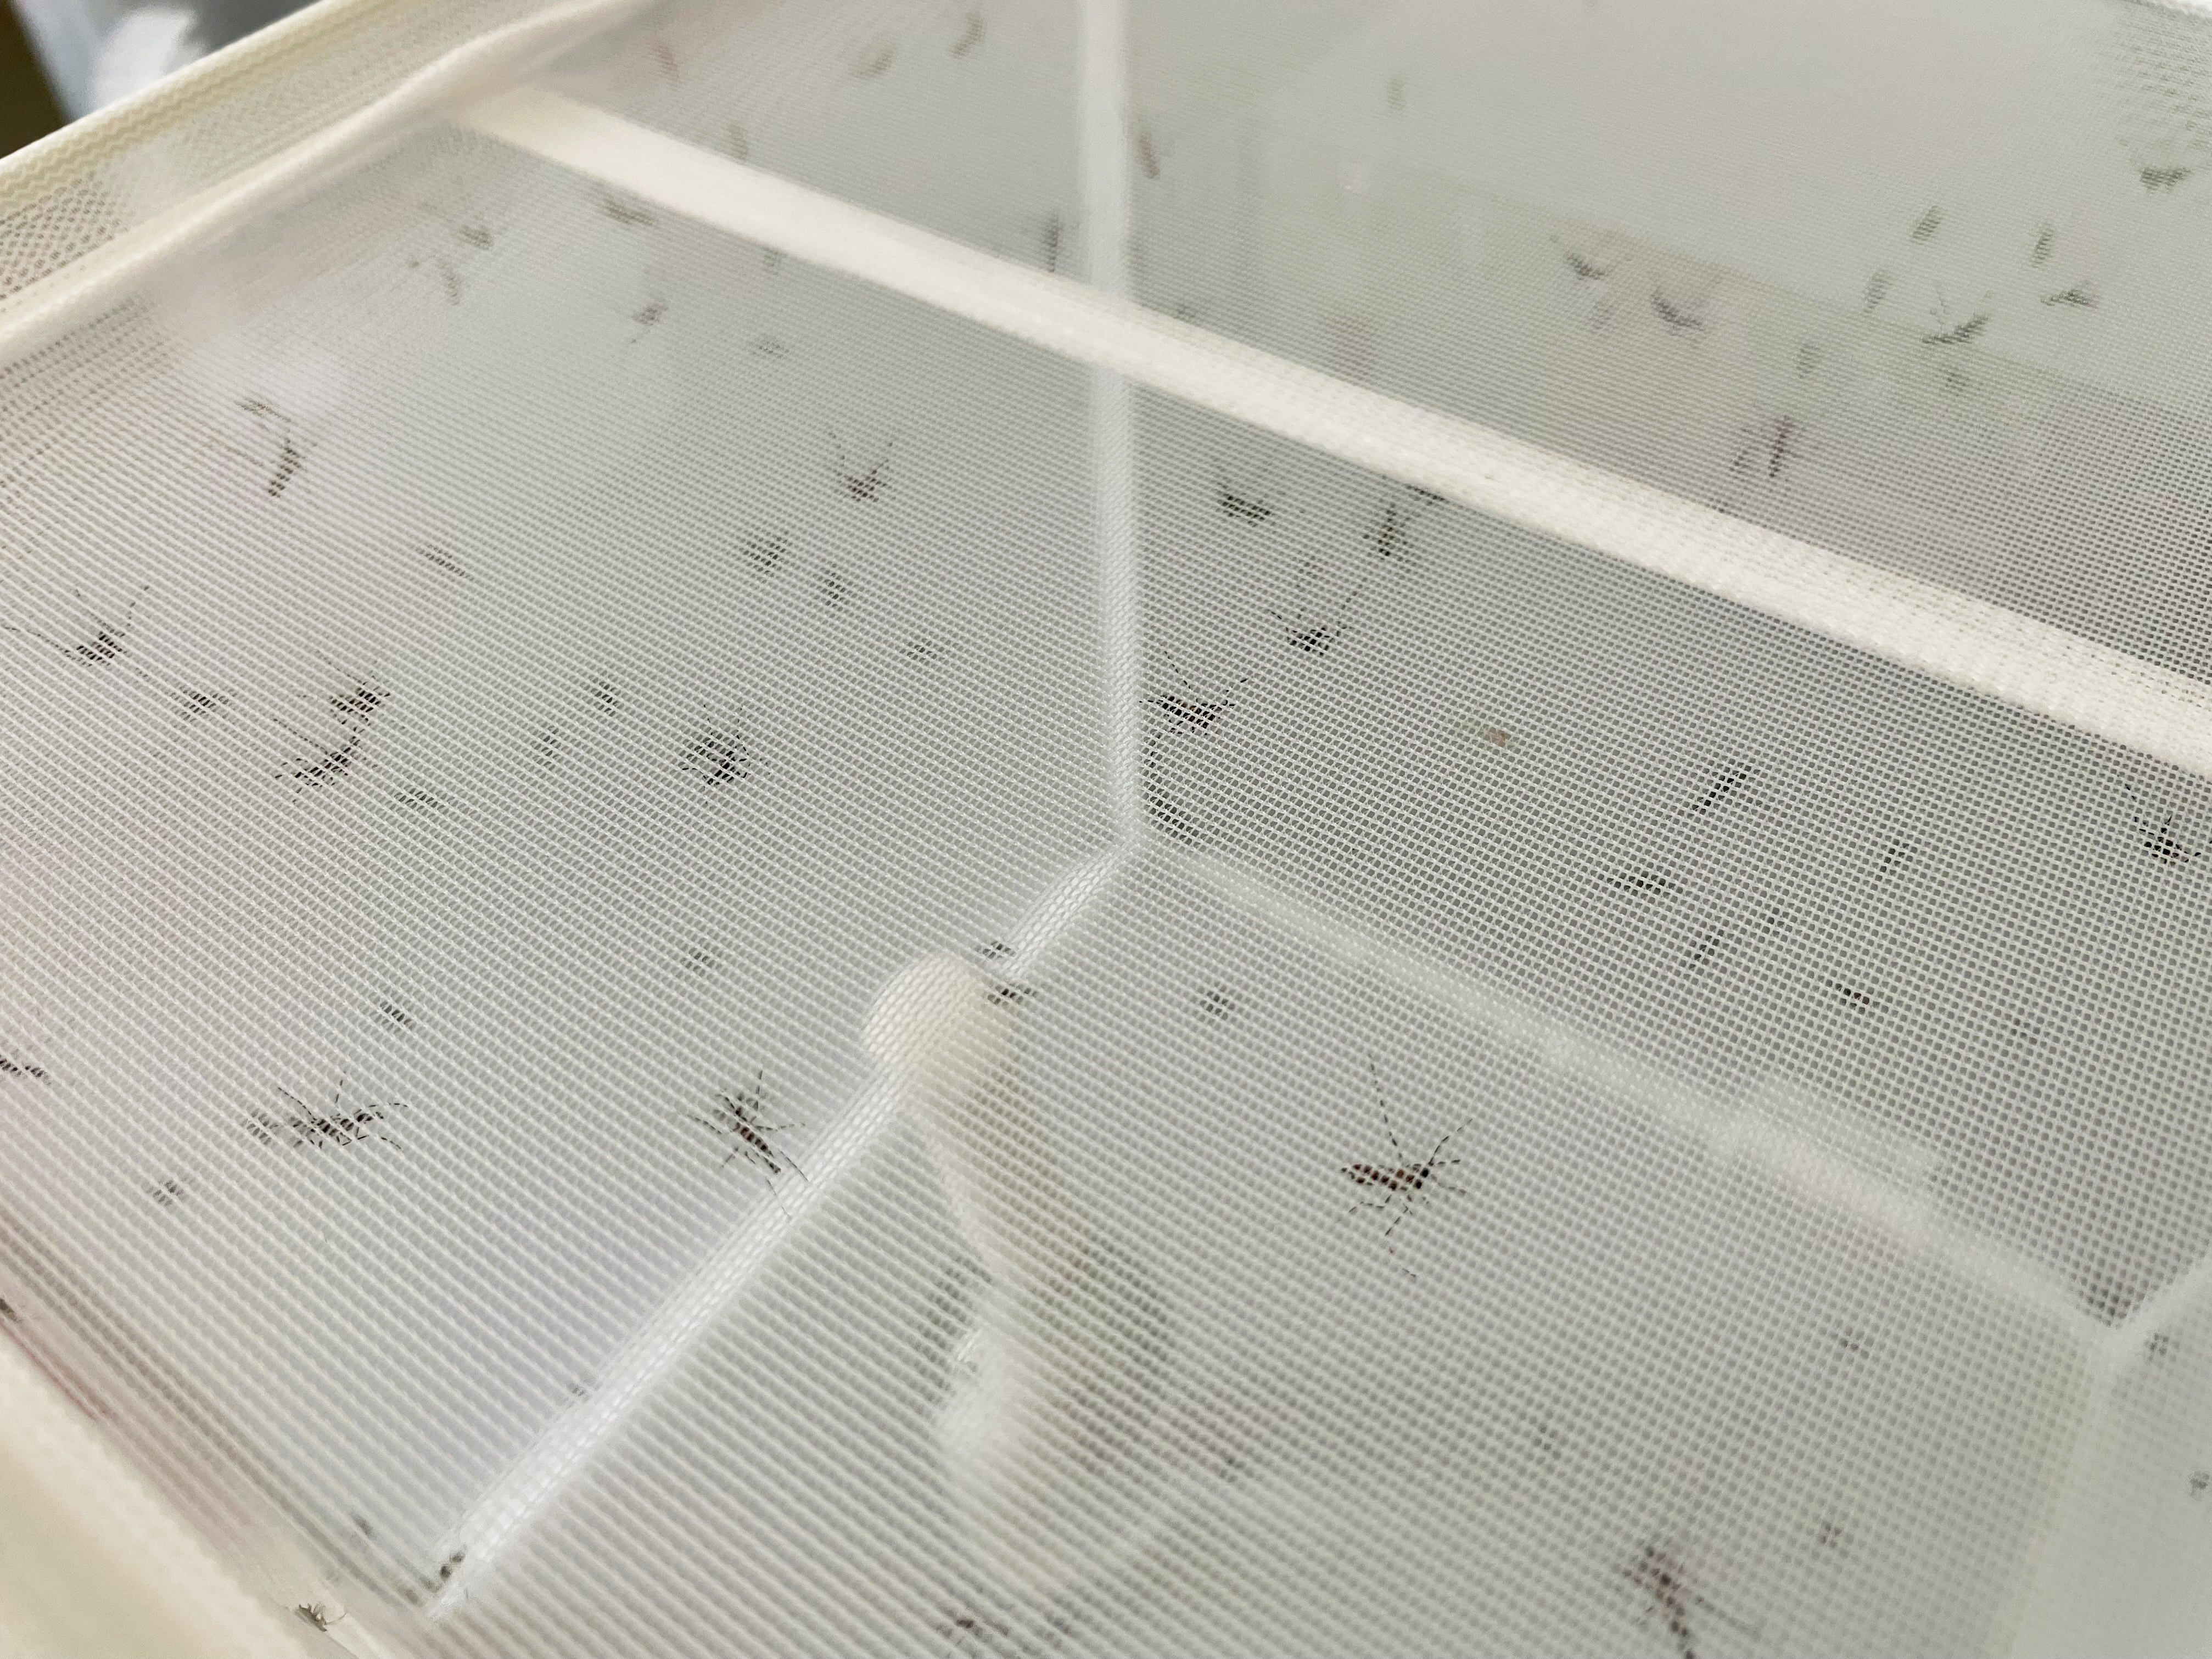 Mosquitos in a mesh cage